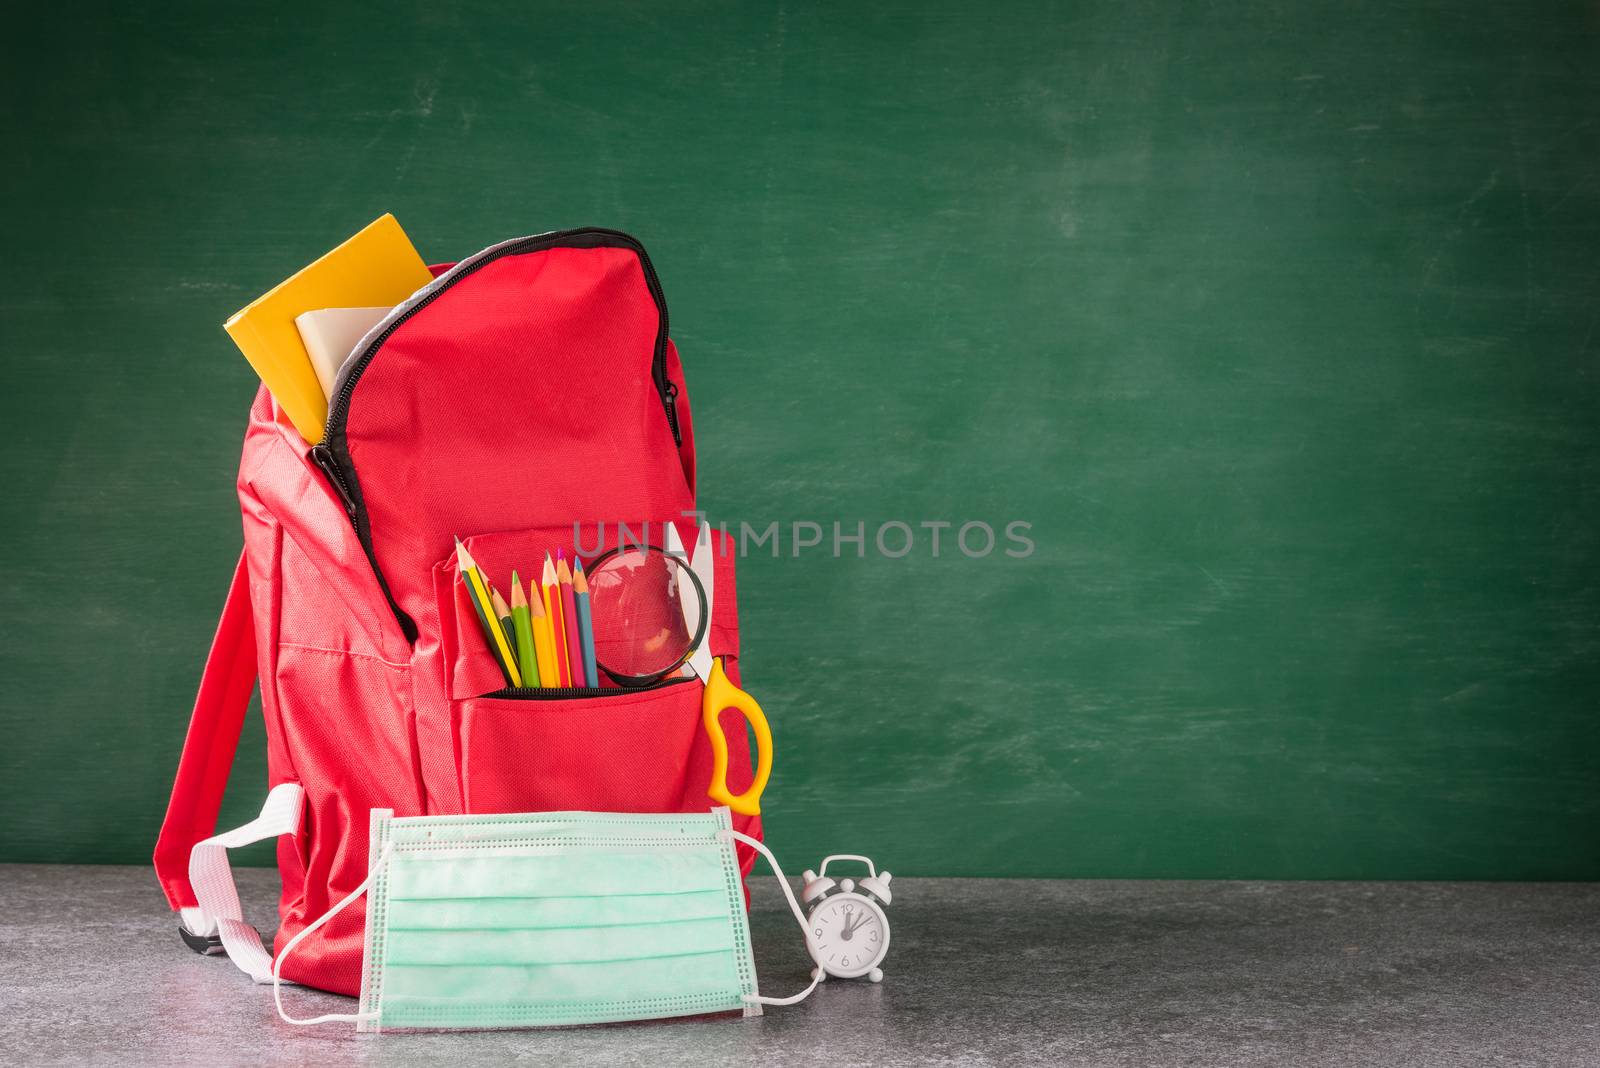 Front school backpack and accessories with face mask protect on desk at green chalkboard, student bag at classroom backboard, Back to school education new normal outbreak COVID-19 or coronavirus